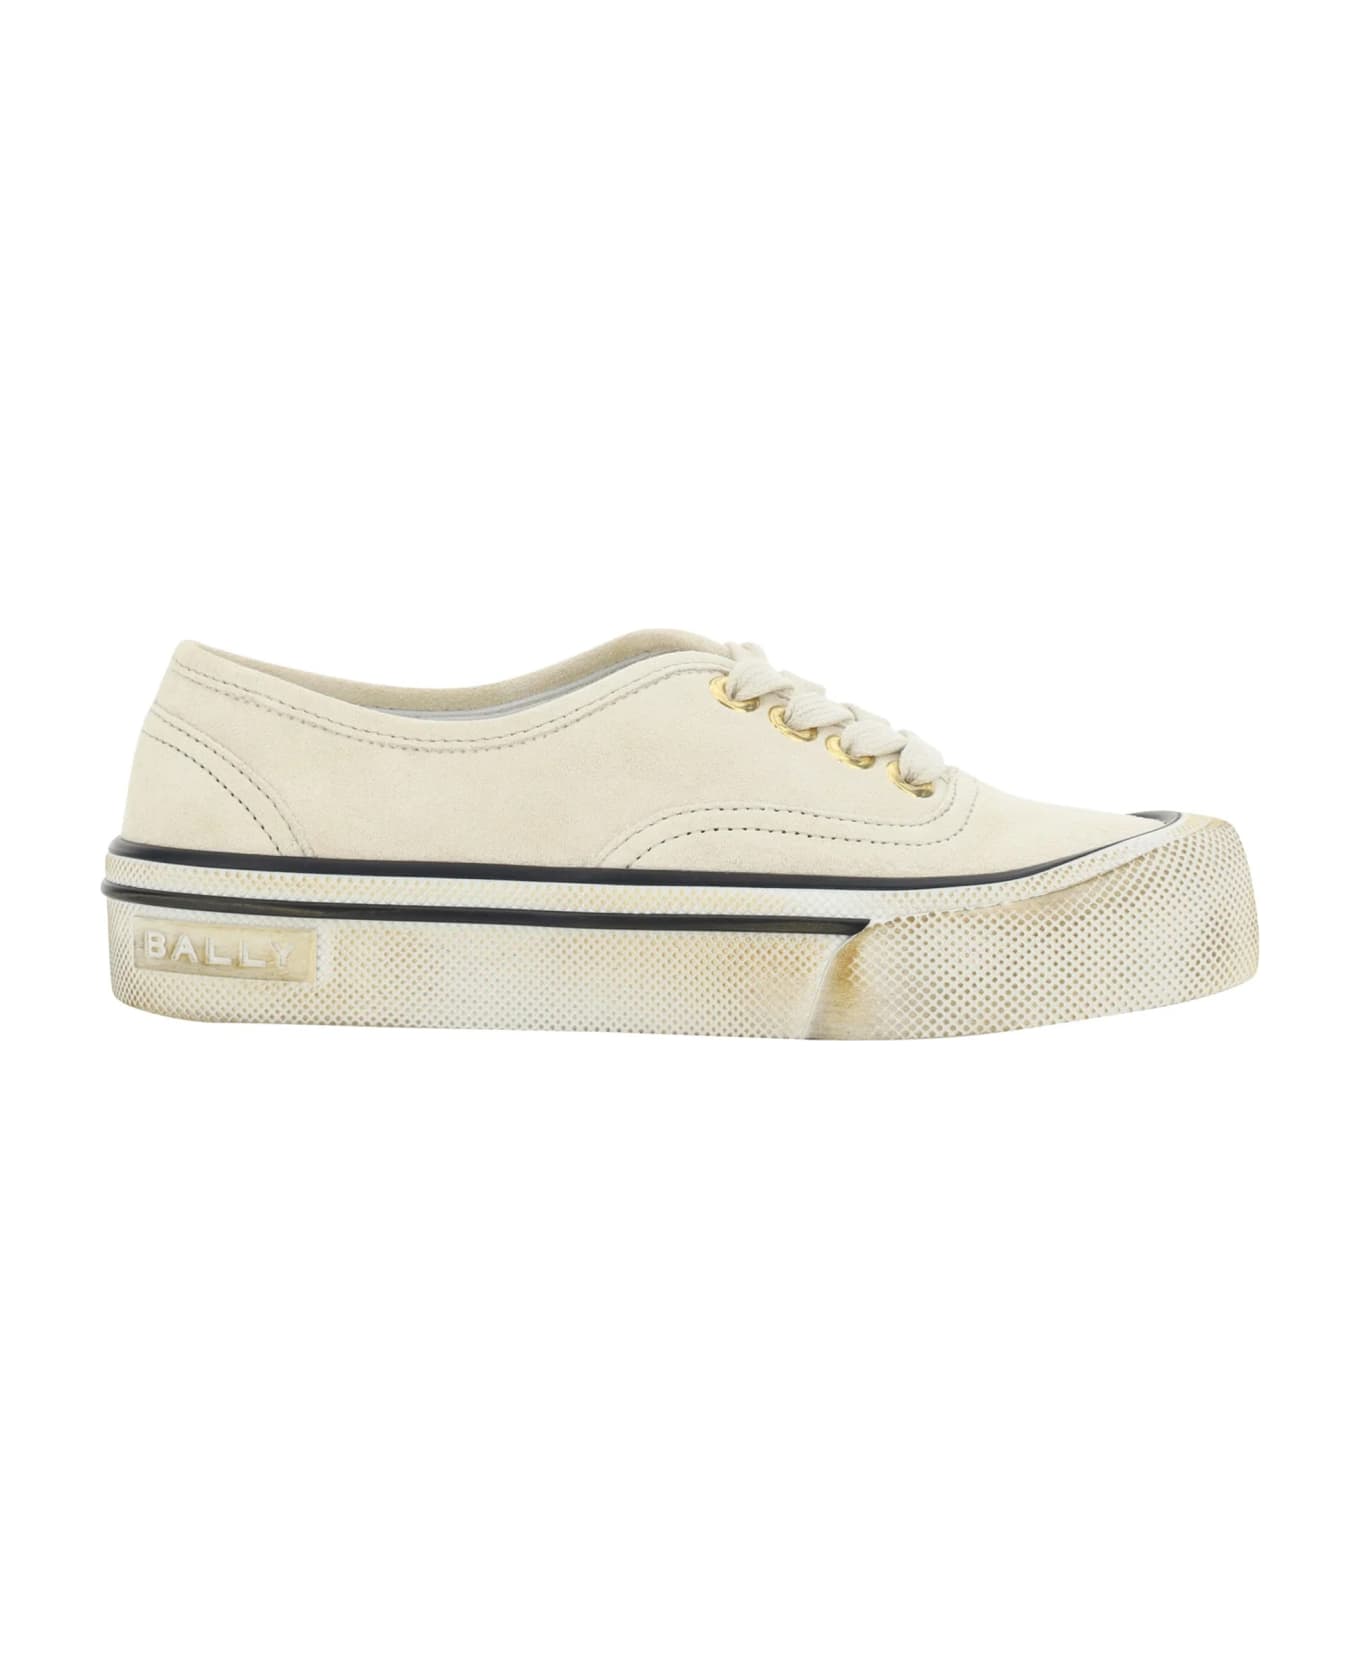 Bally Lyder Leather Sneakers - White スニーカー